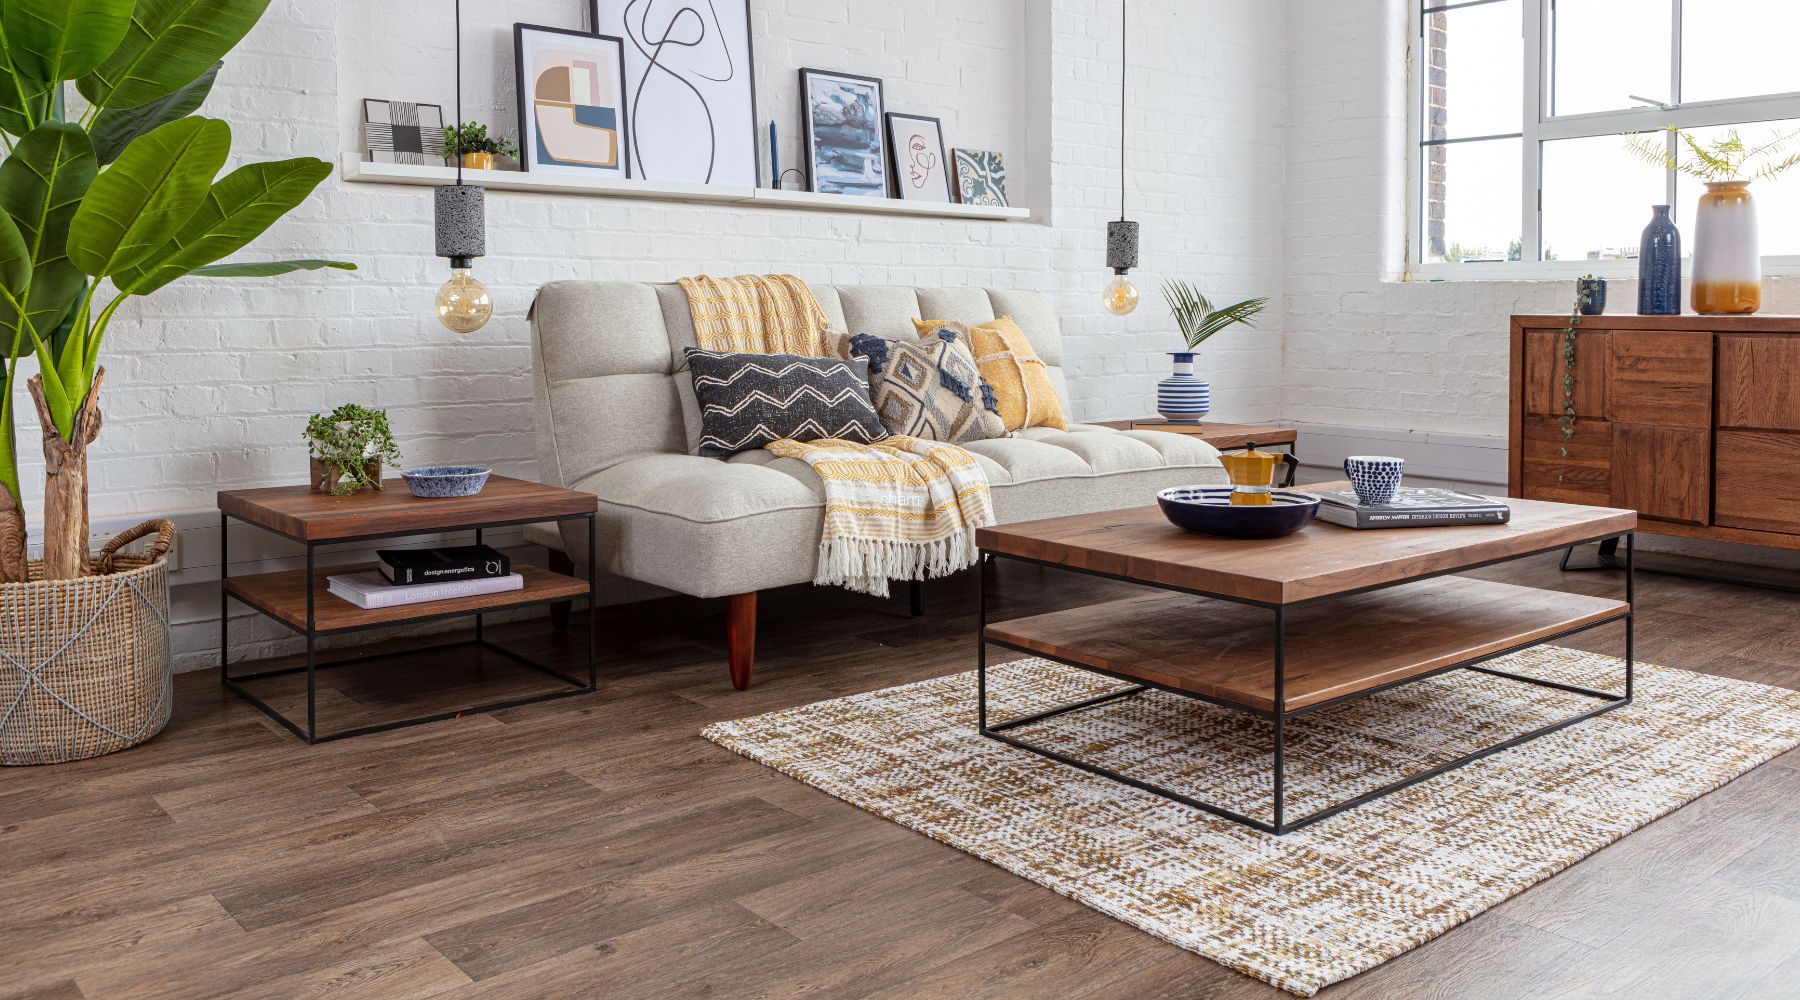 industrial coffee table with white sofa and yellow rug